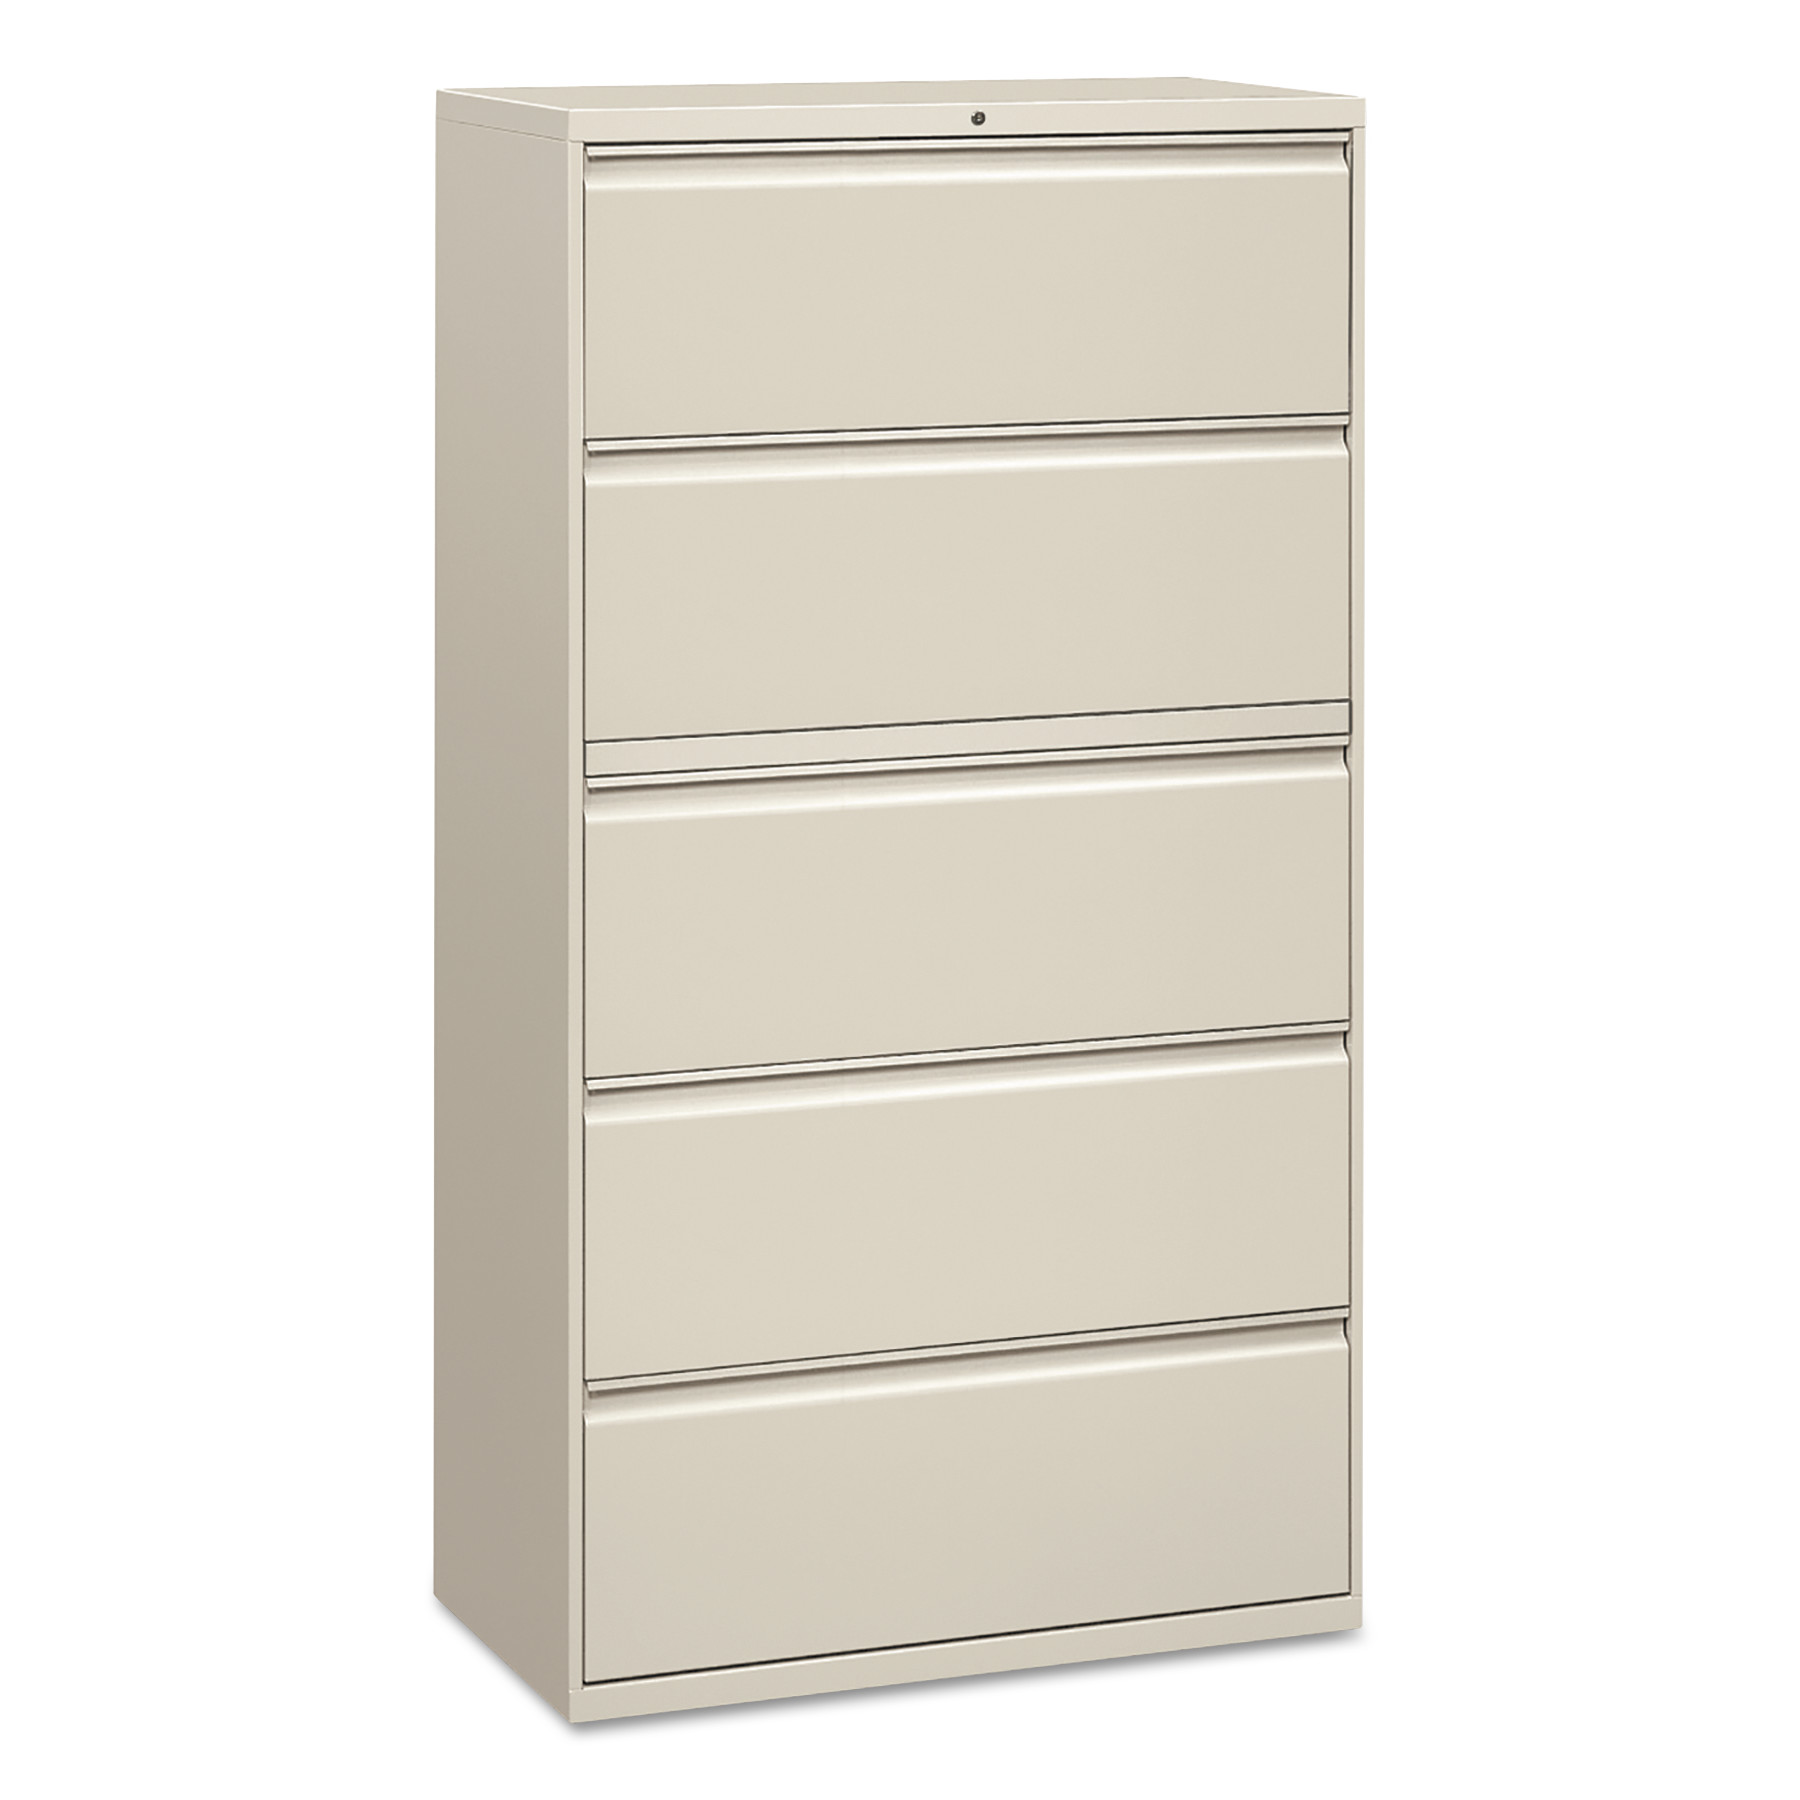 Five-Drawer Lateral File Cabinet, 36w x 18d x 64 1/4h, Light Gray